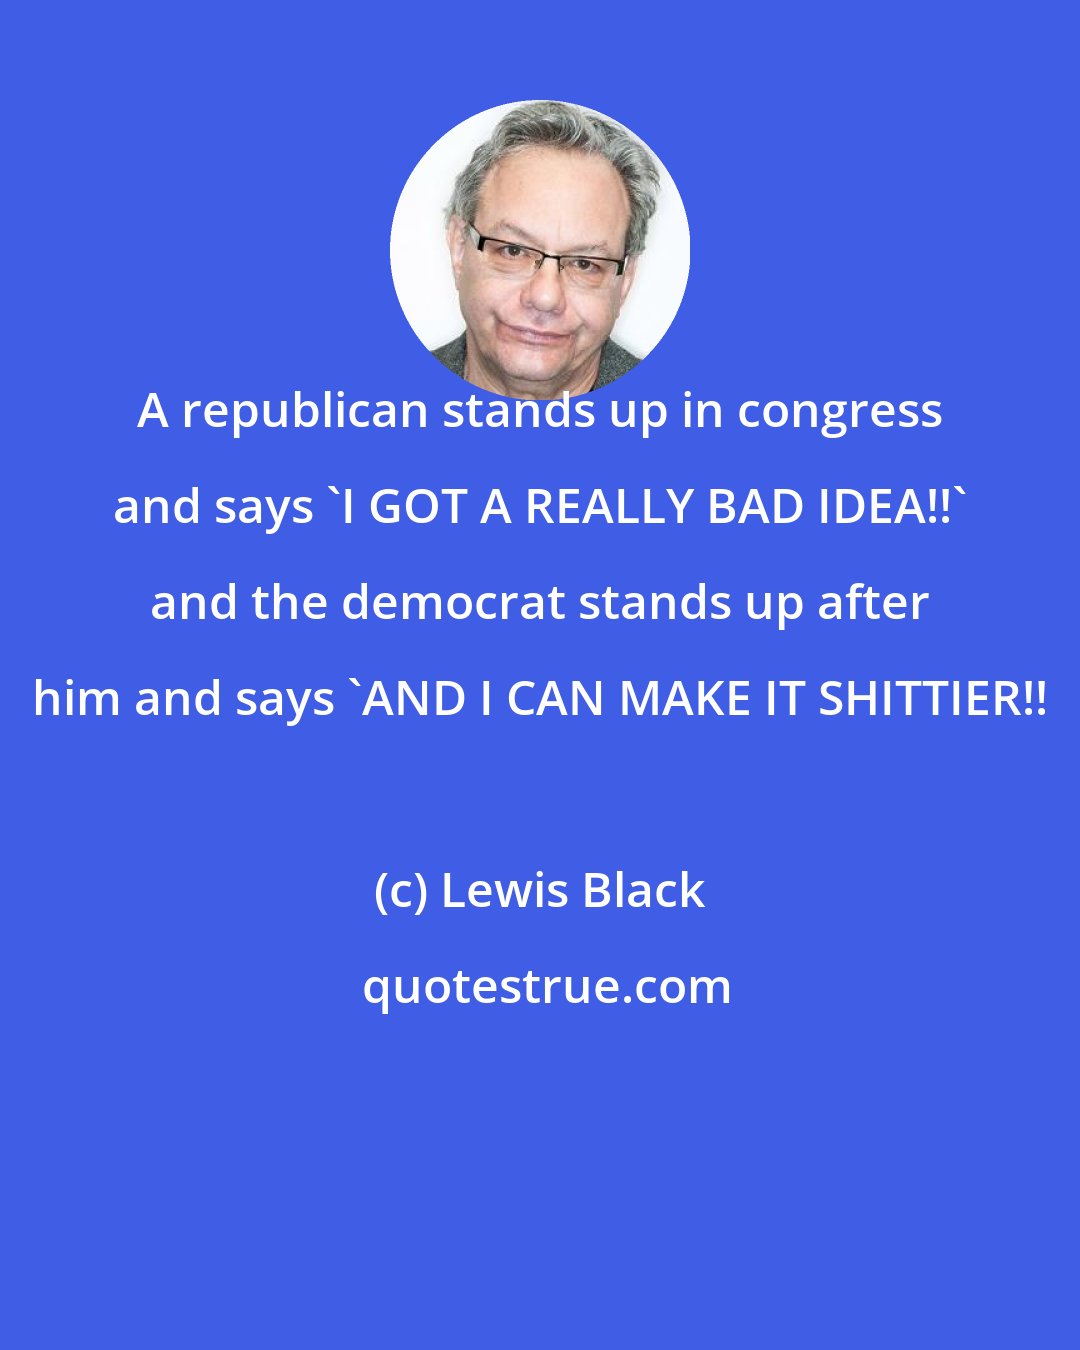 Lewis Black: A republican stands up in congress and says 'I GOT A REALLY BAD IDEA!!' and the democrat stands up after him and says 'AND I CAN MAKE IT SHITTIER!!